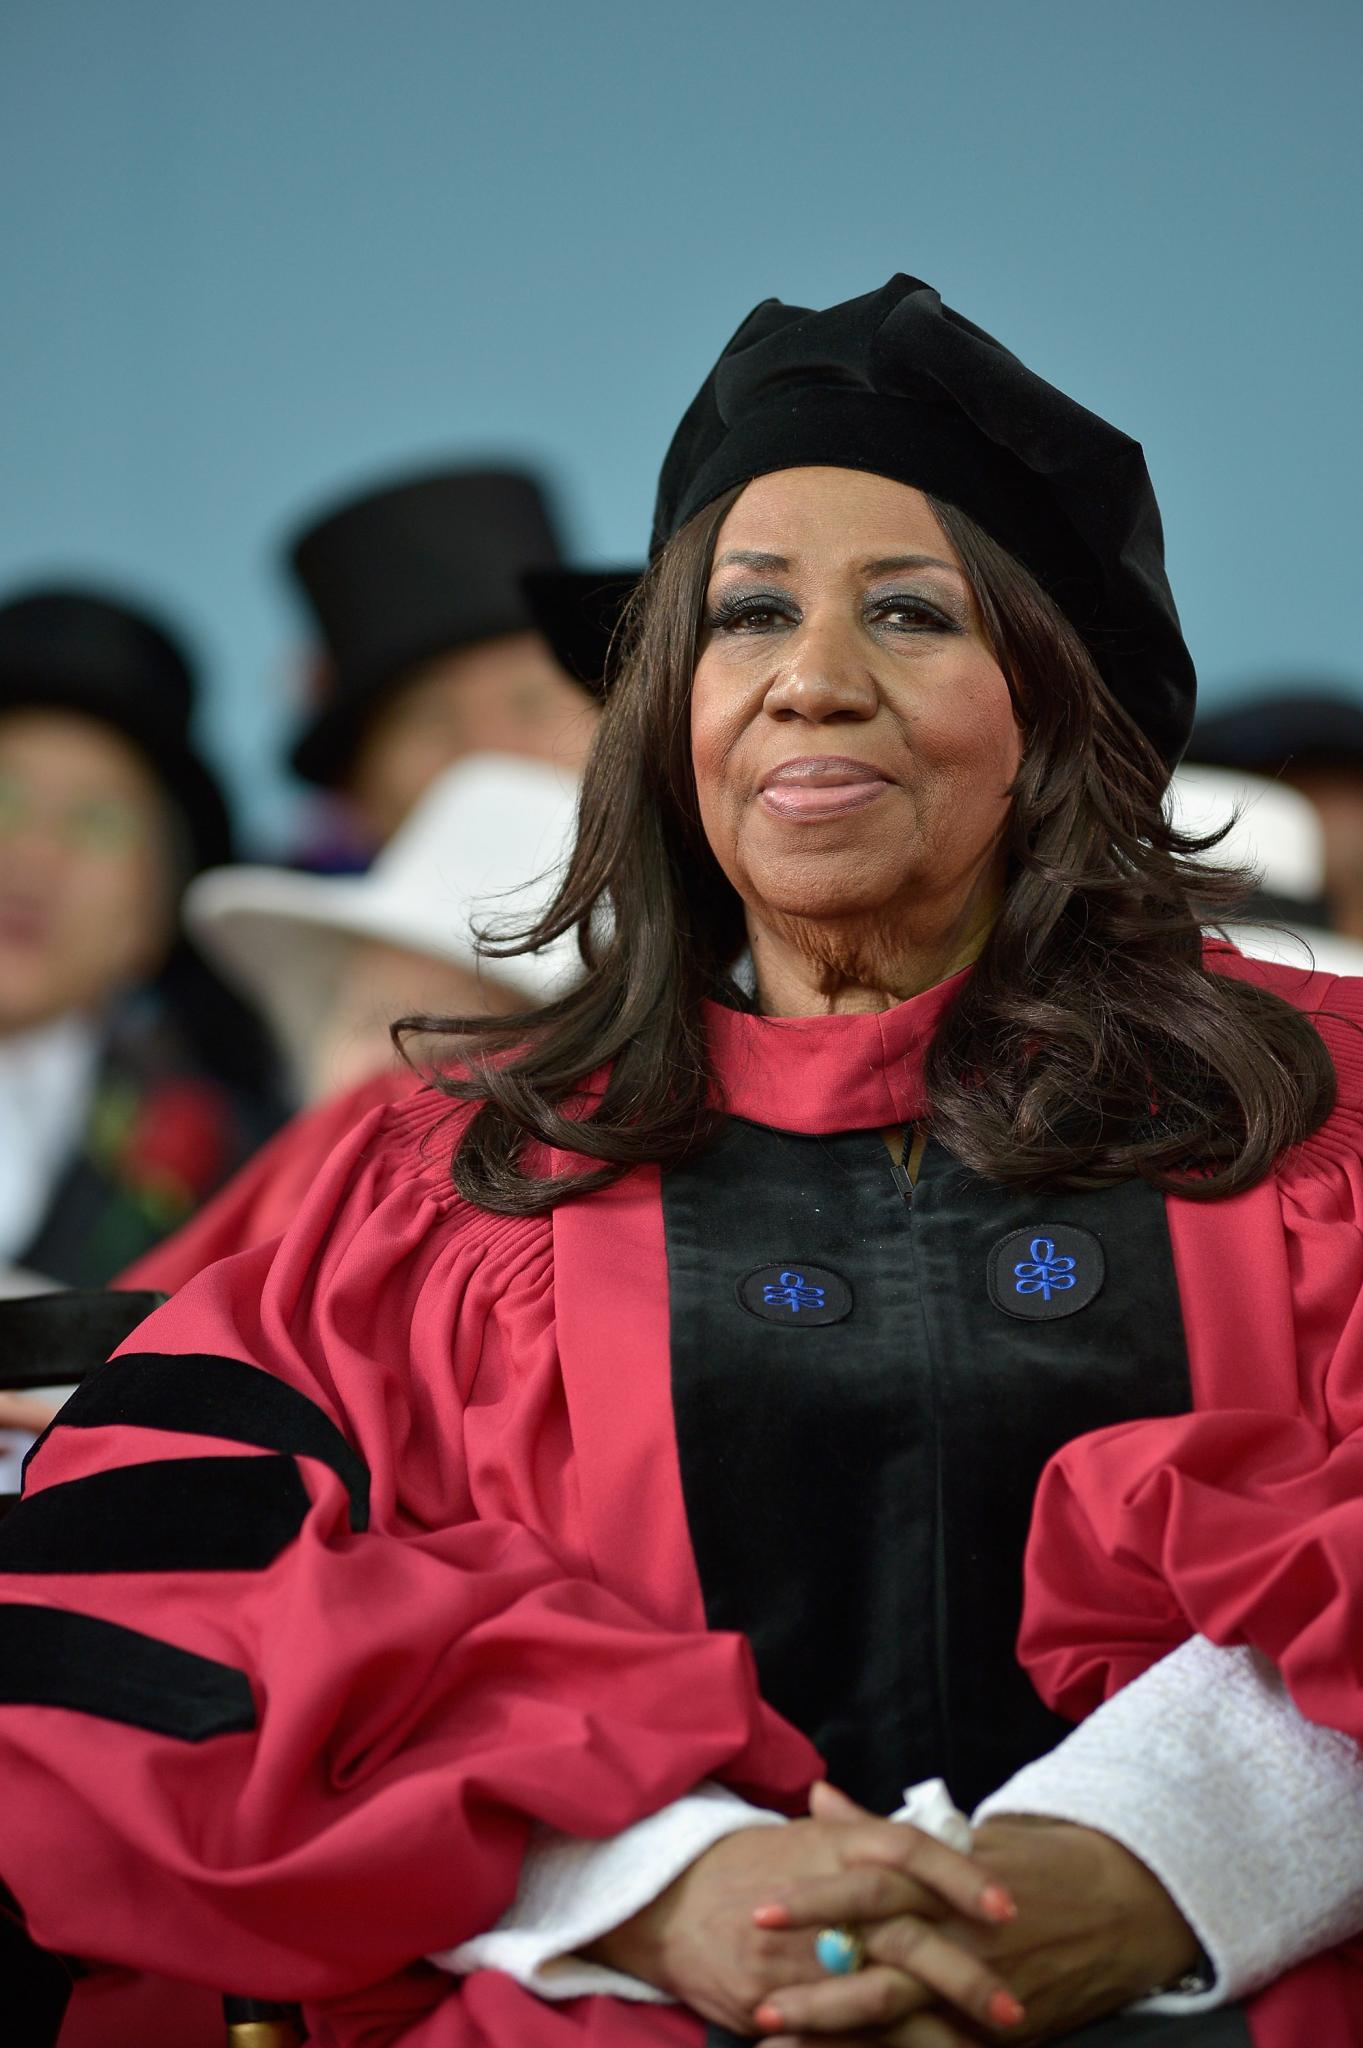 13 Celebrities With Honorary Doctorate Degrees